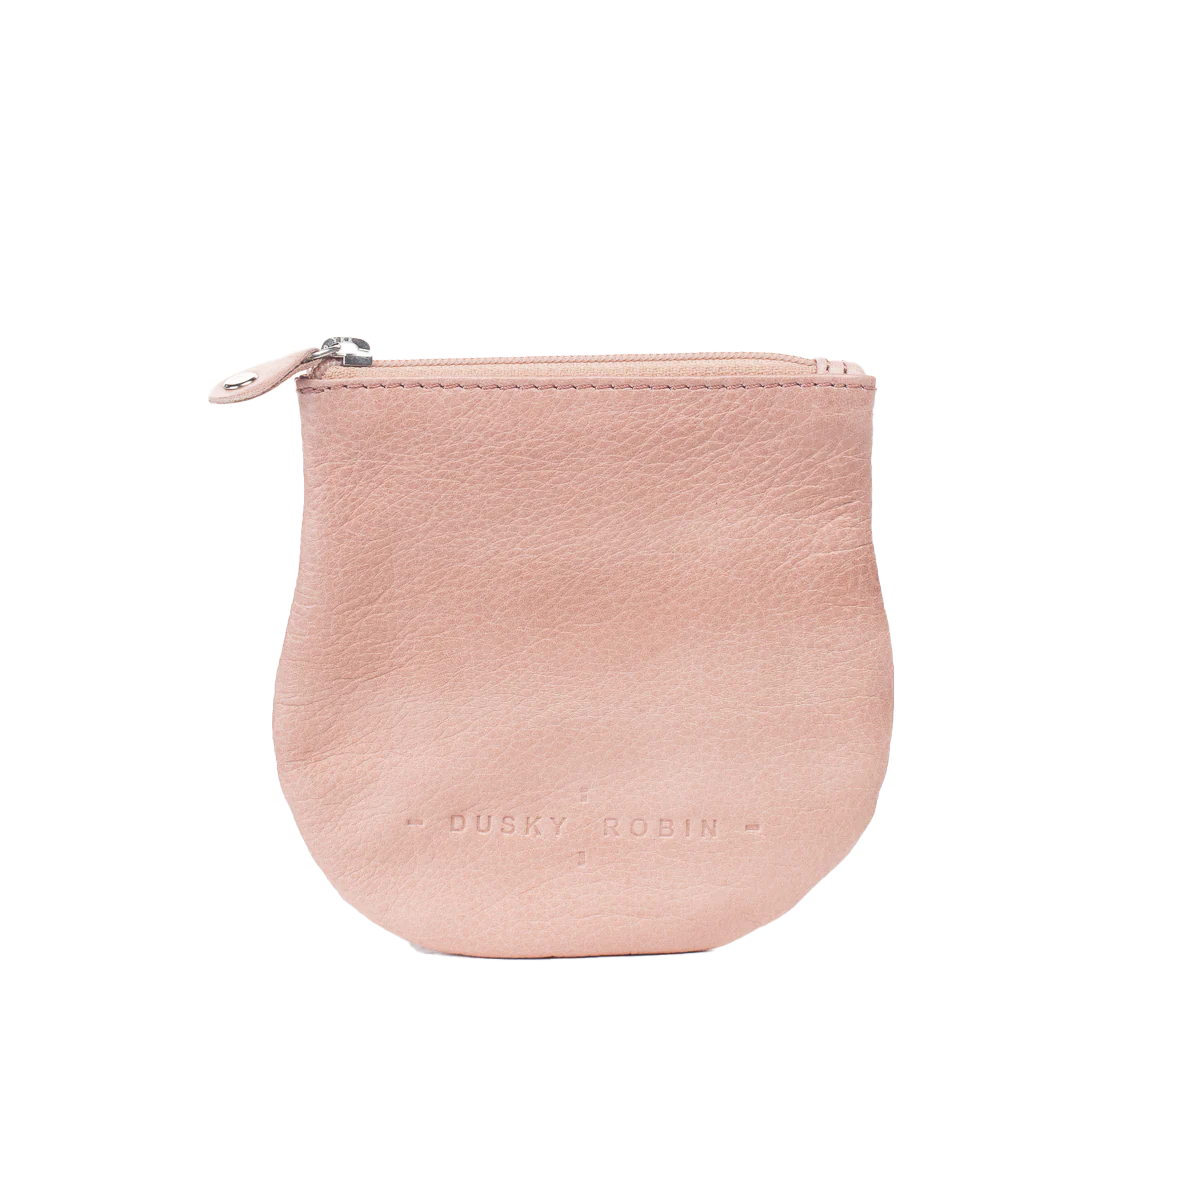 Lilly leather coin purse pink